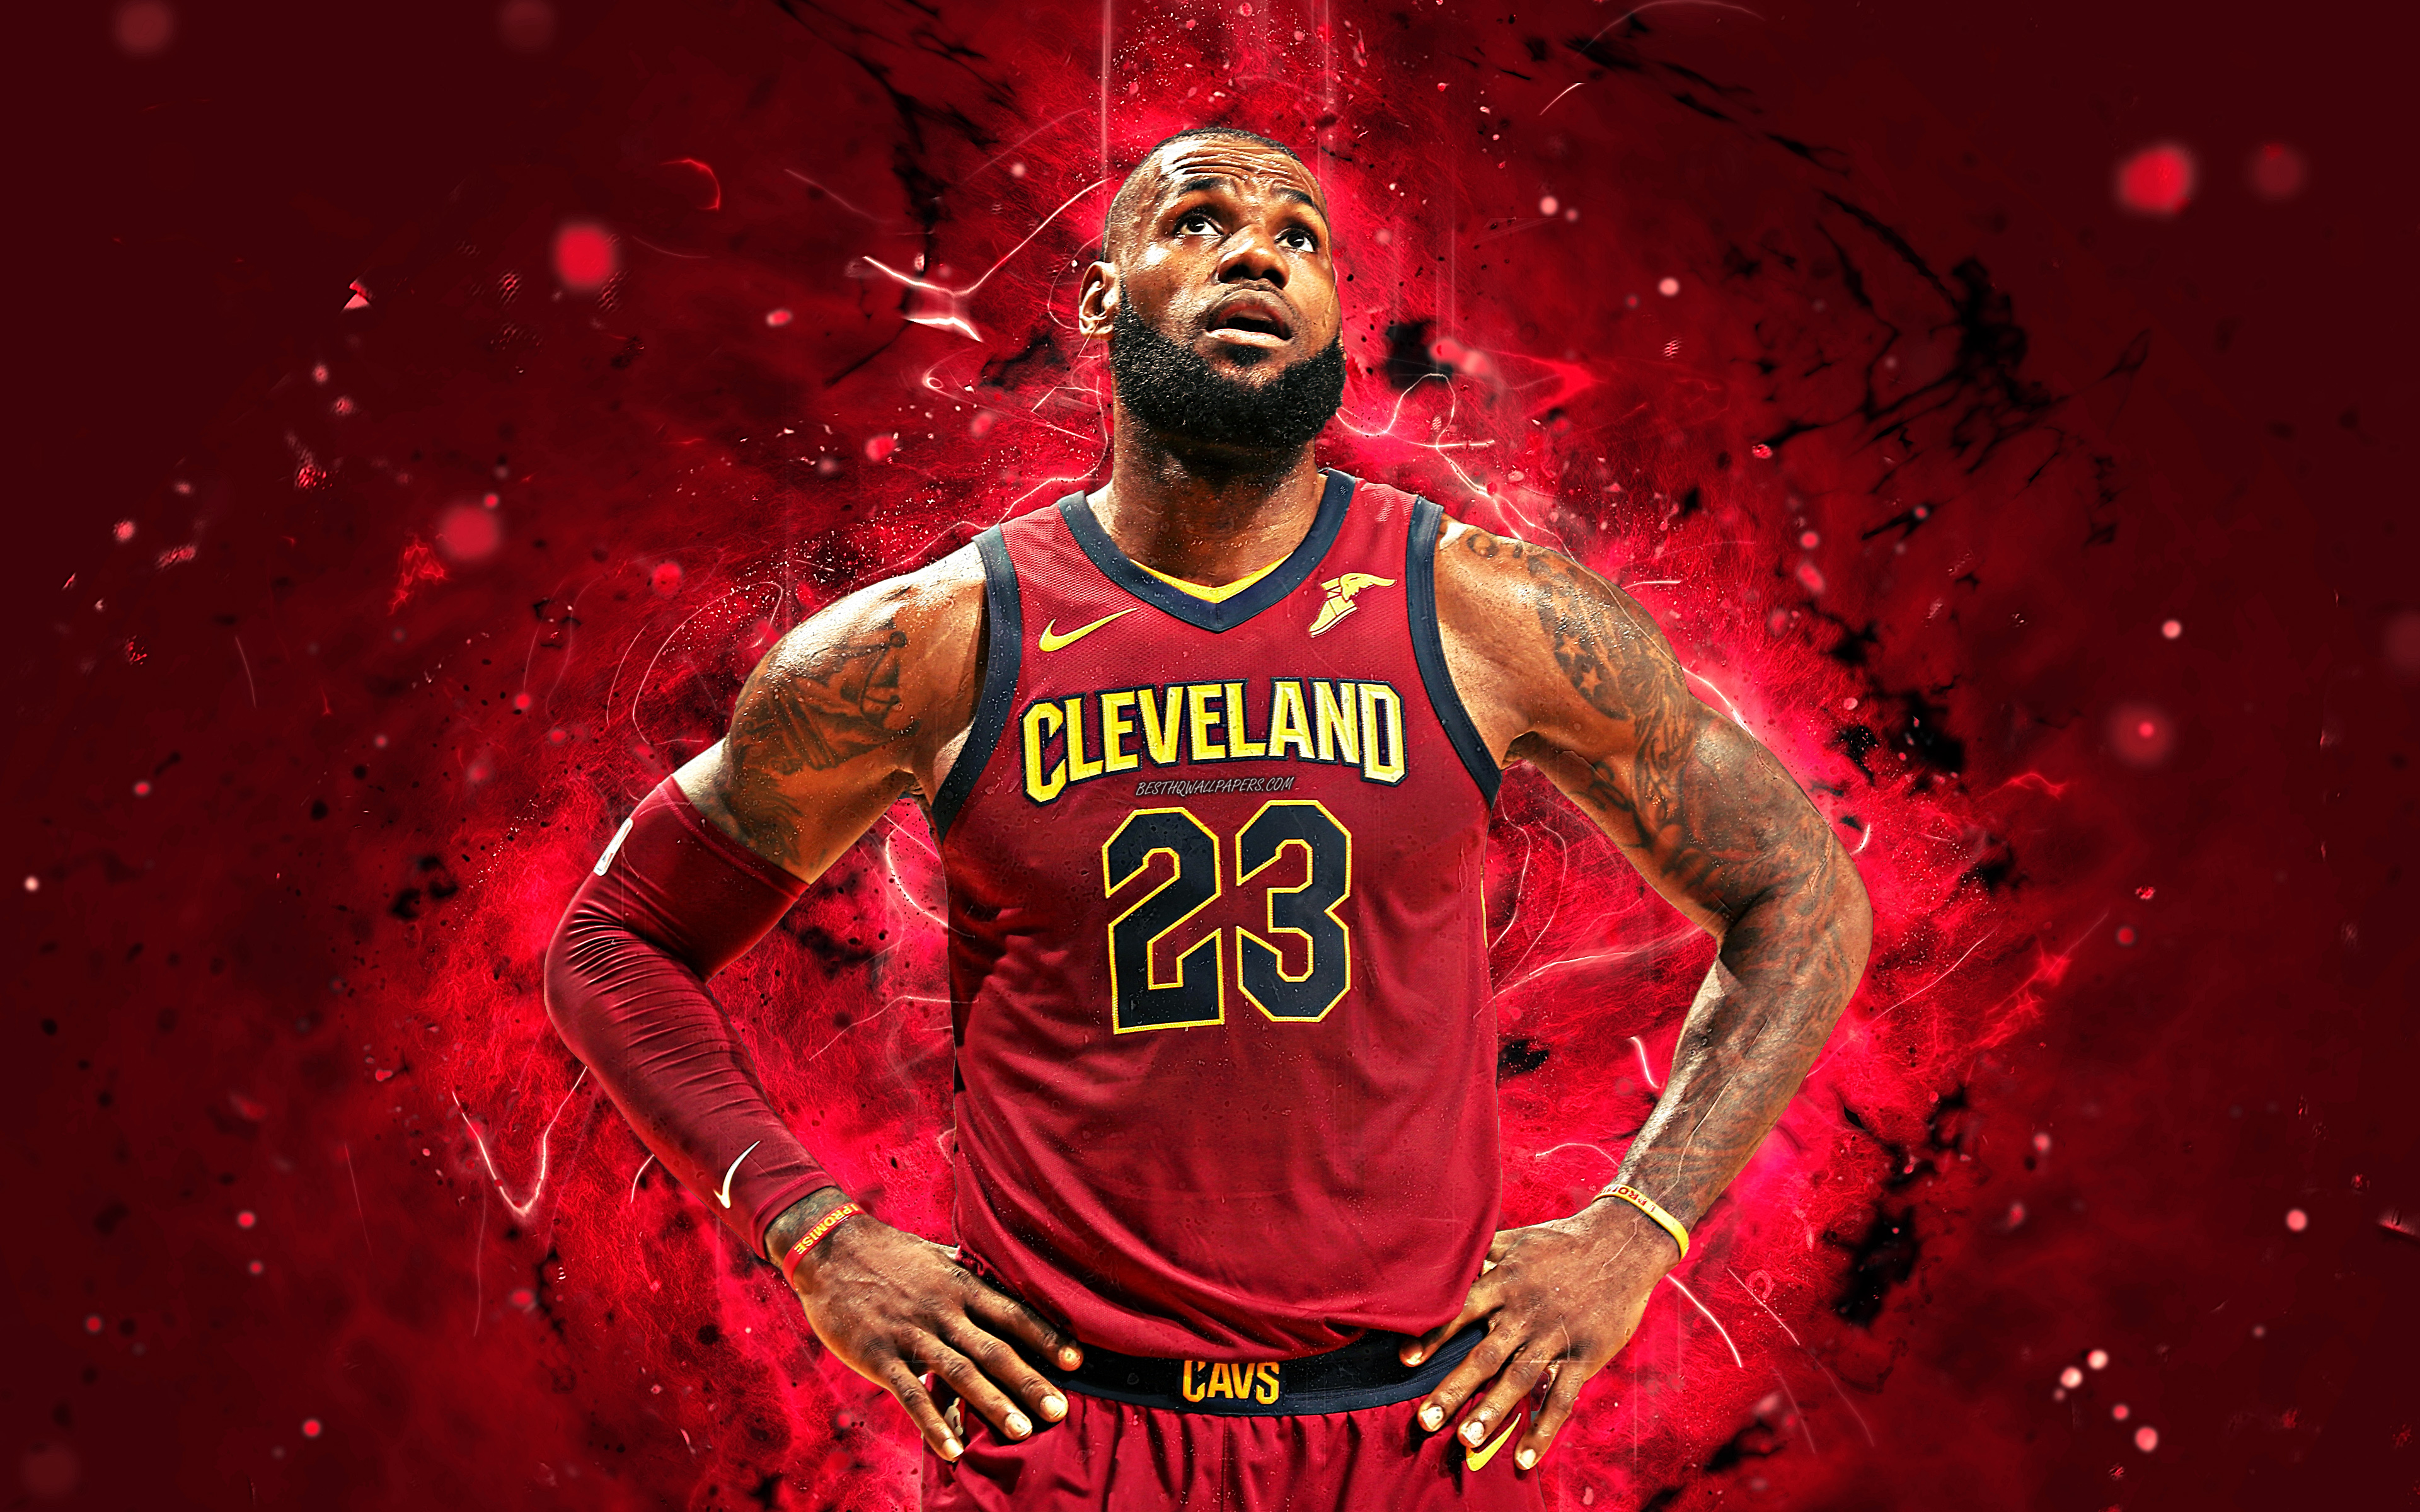 Download wallpaper LeBron James, 4k, abstract art, NBA, basketball stars, Cleveland Cavaliers, LeBron Raymone James Sr, CAVS, neon lights, basketball, creative for desktop with resolution 3840x2400. High Quality HD picture wallpaper